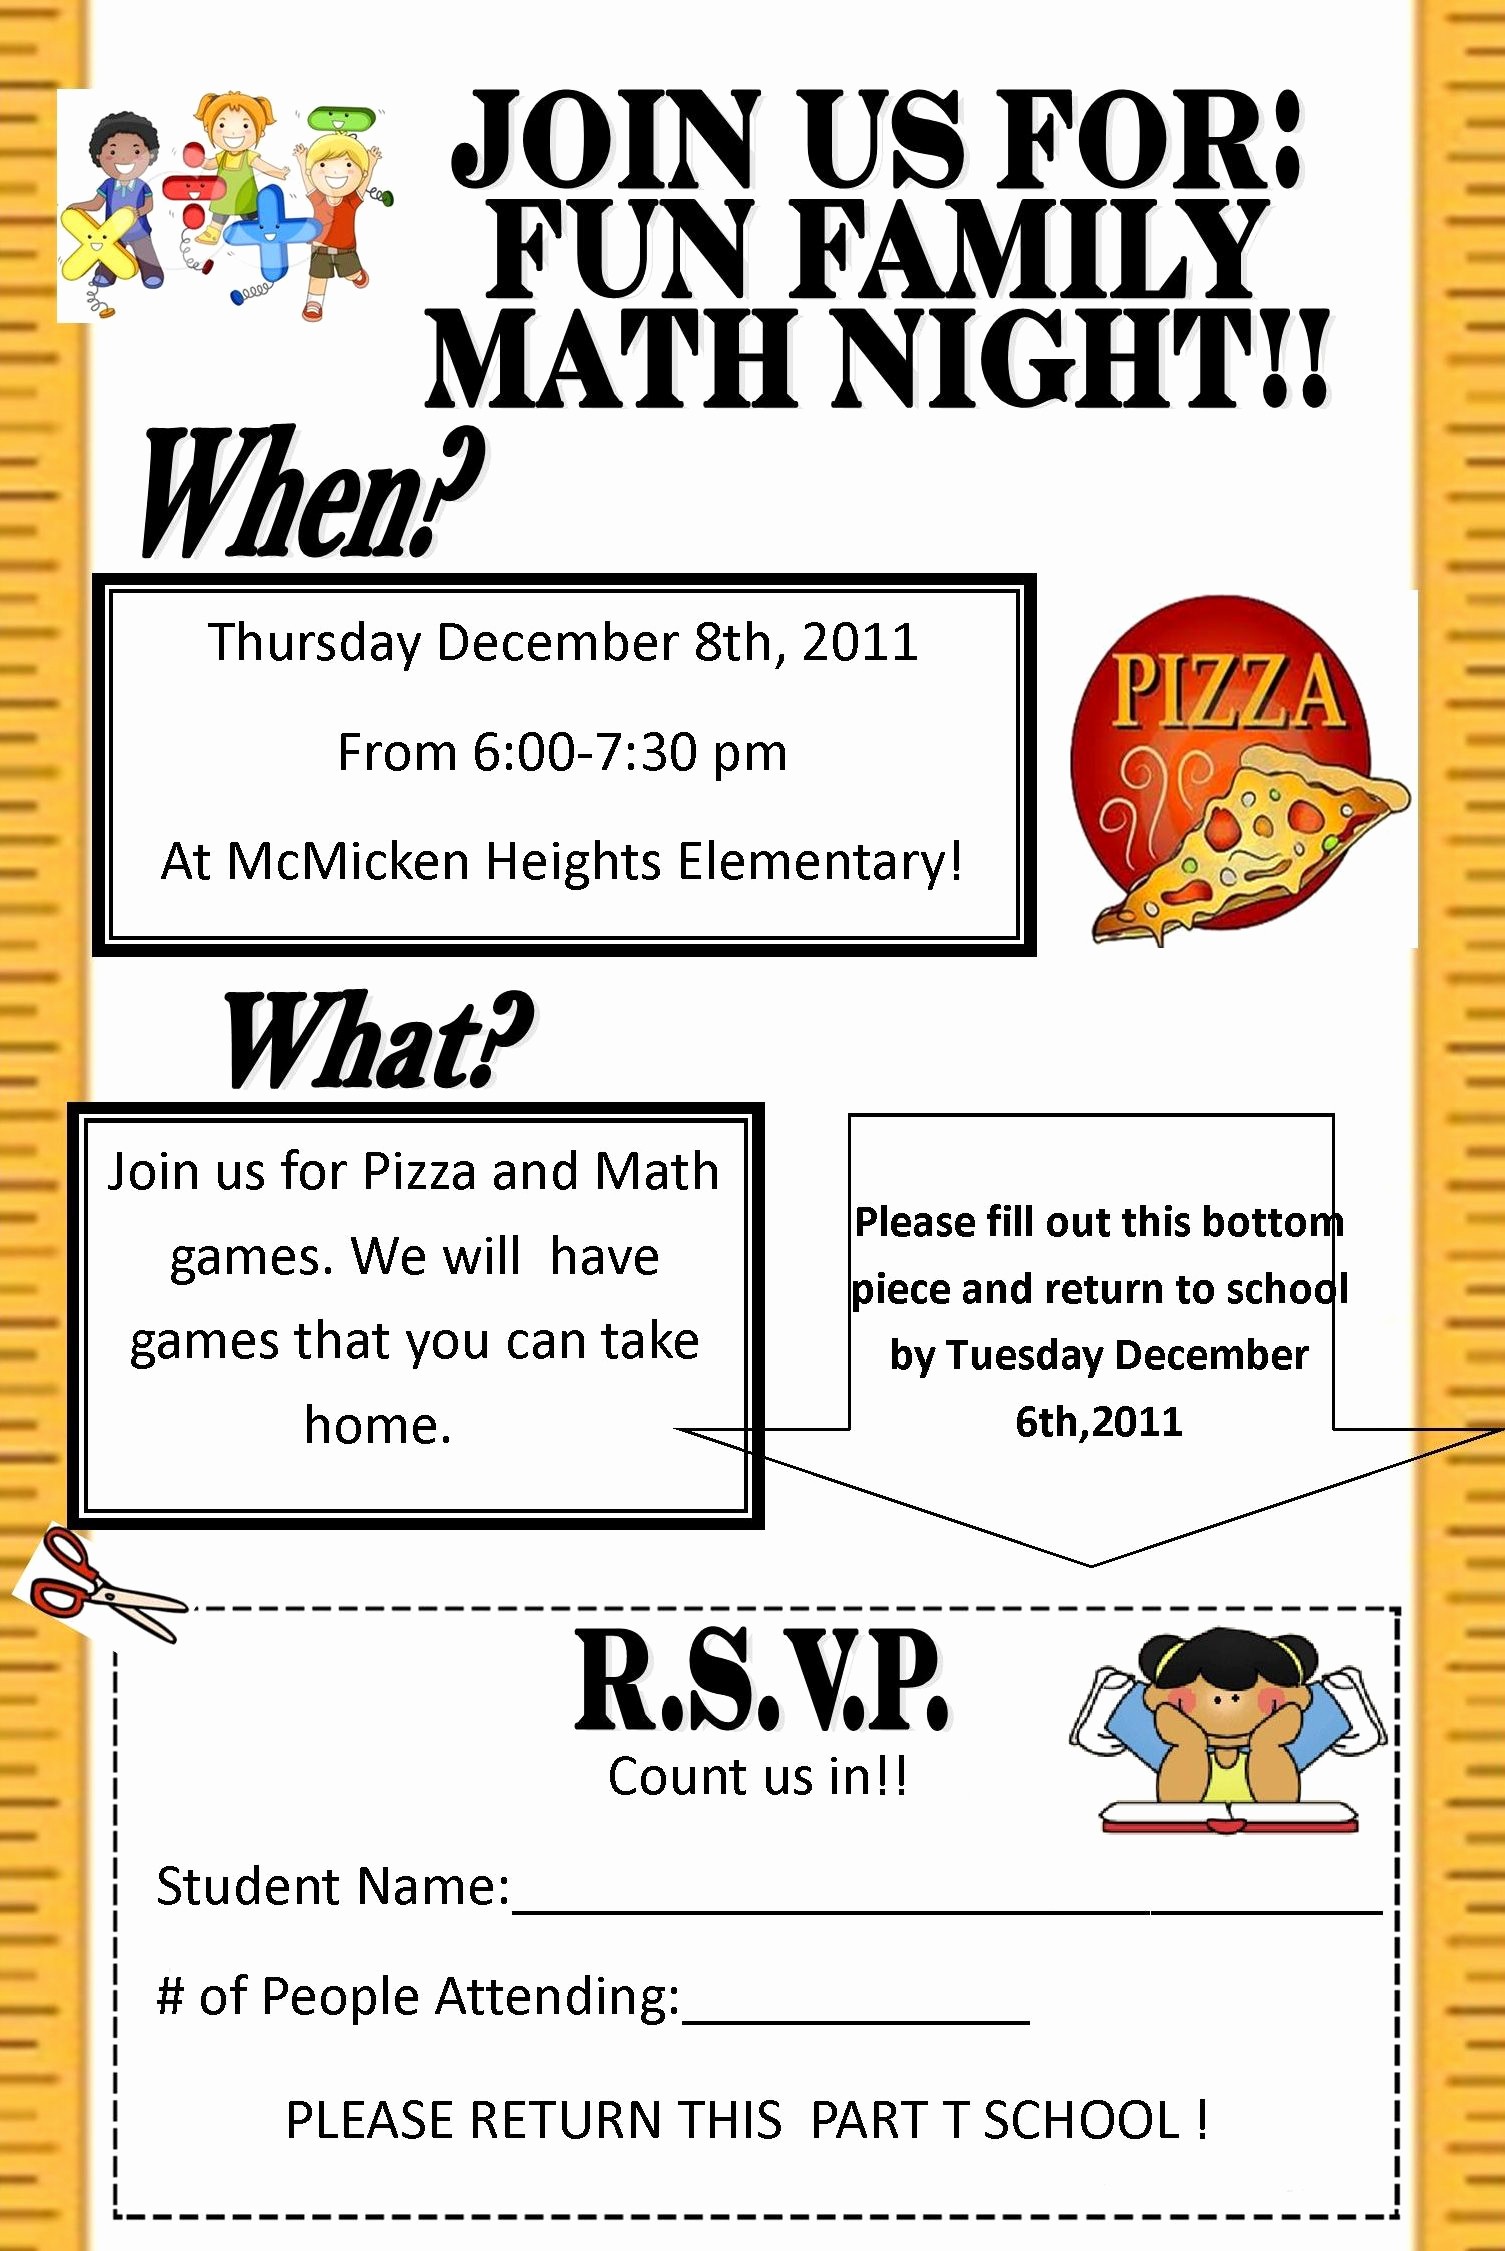 Parent Night Out Flyer Template Luxury Flyer for Family Math Night Google Search